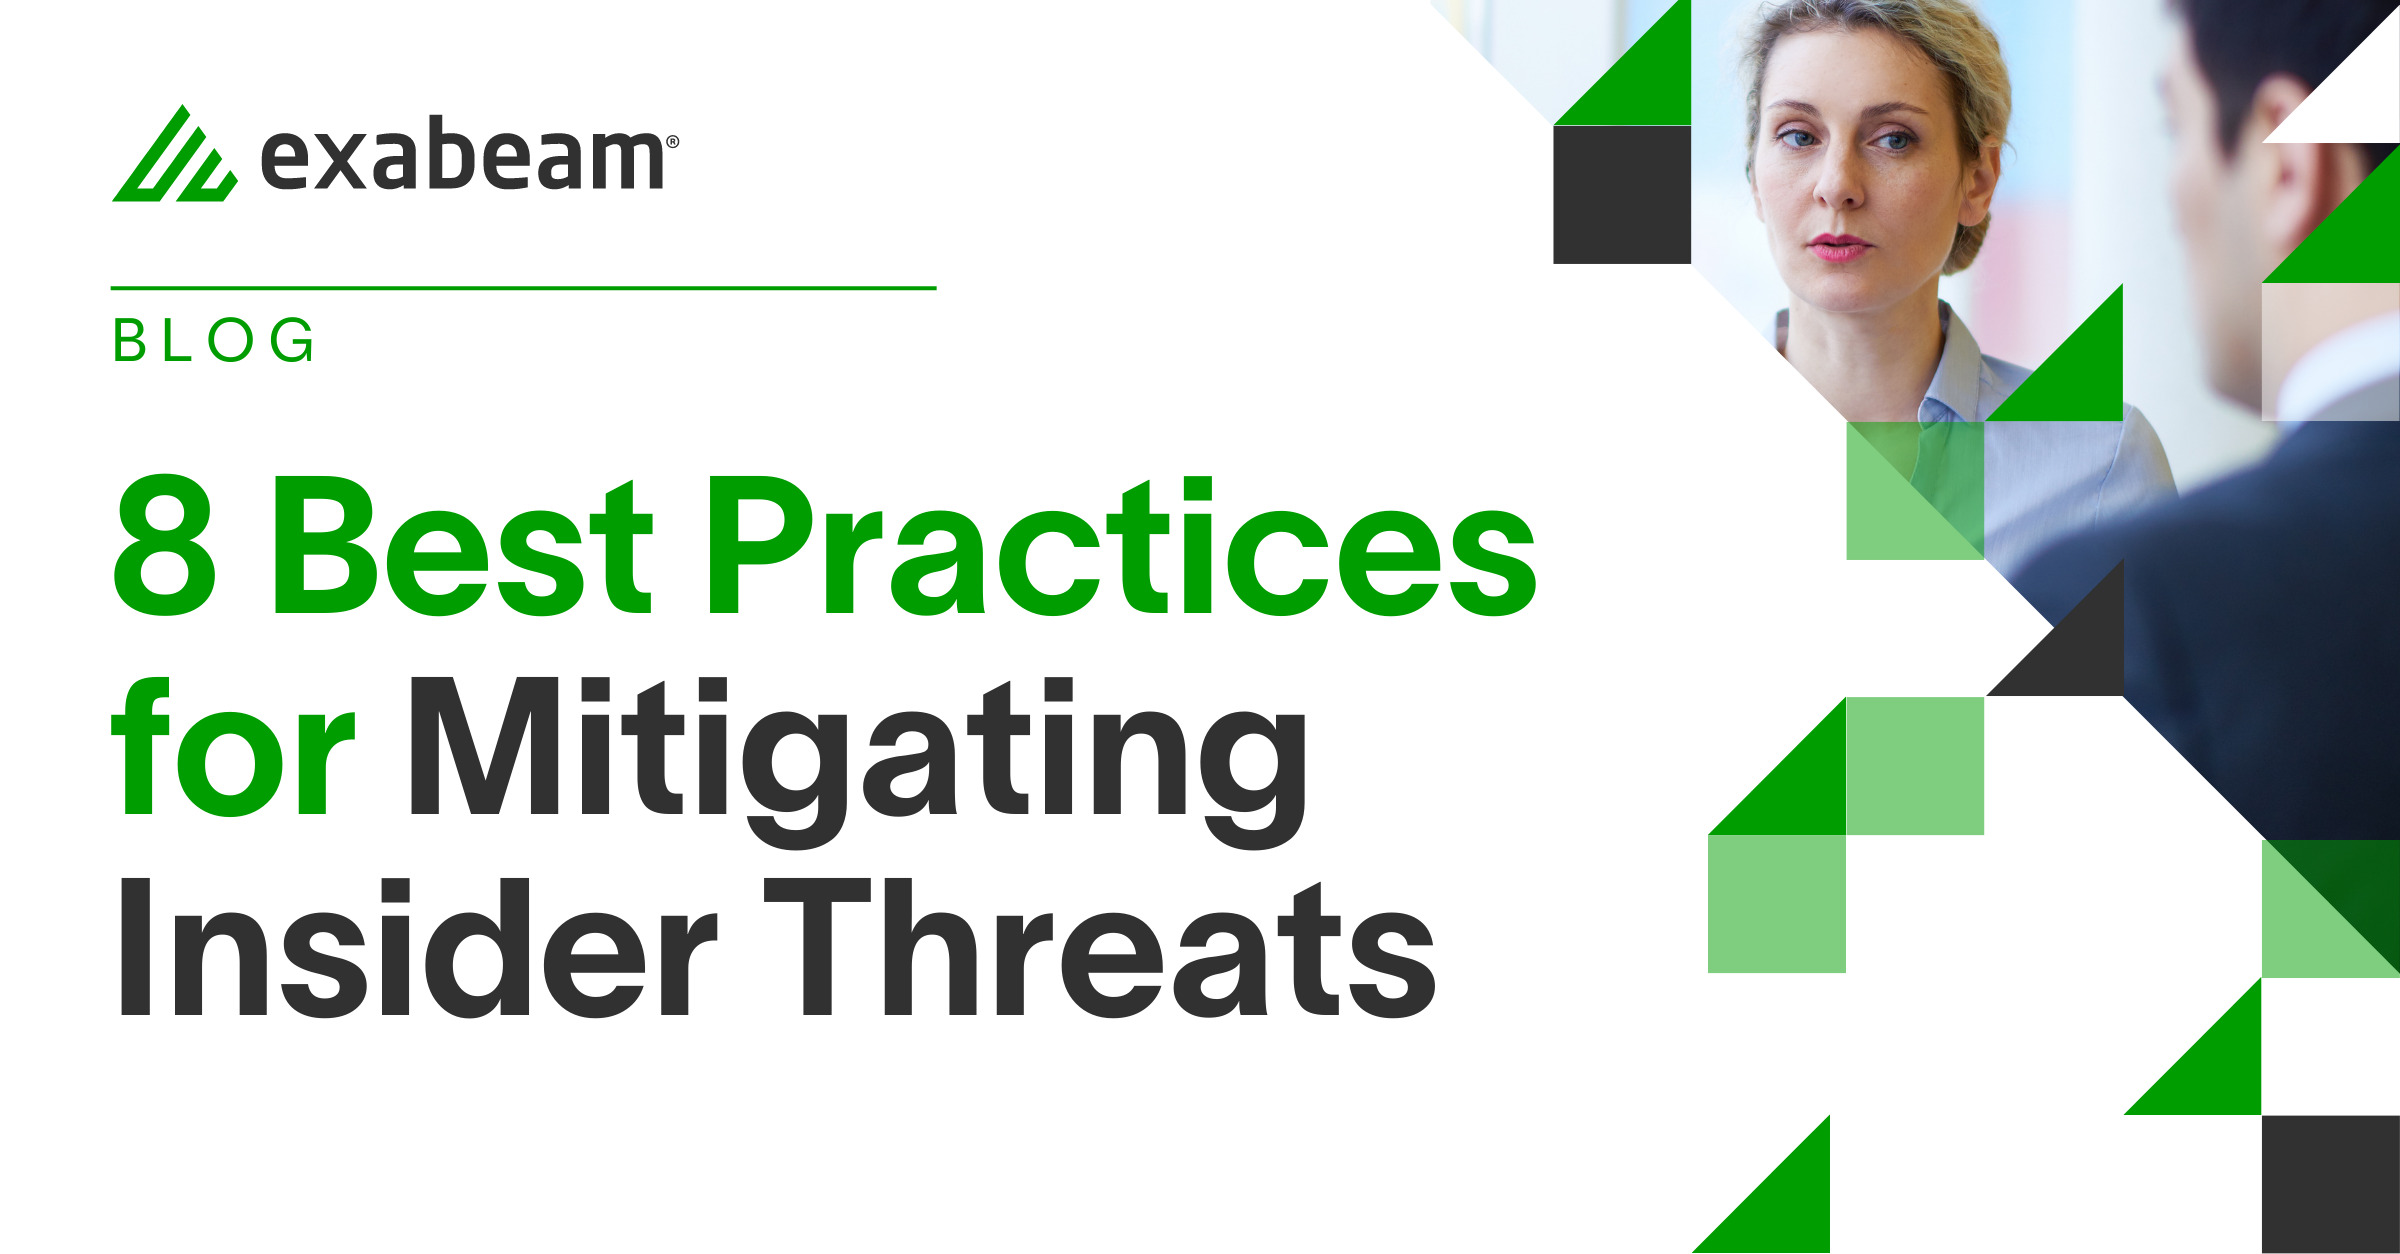 8 Best Practices for Mitigating Insider Threats